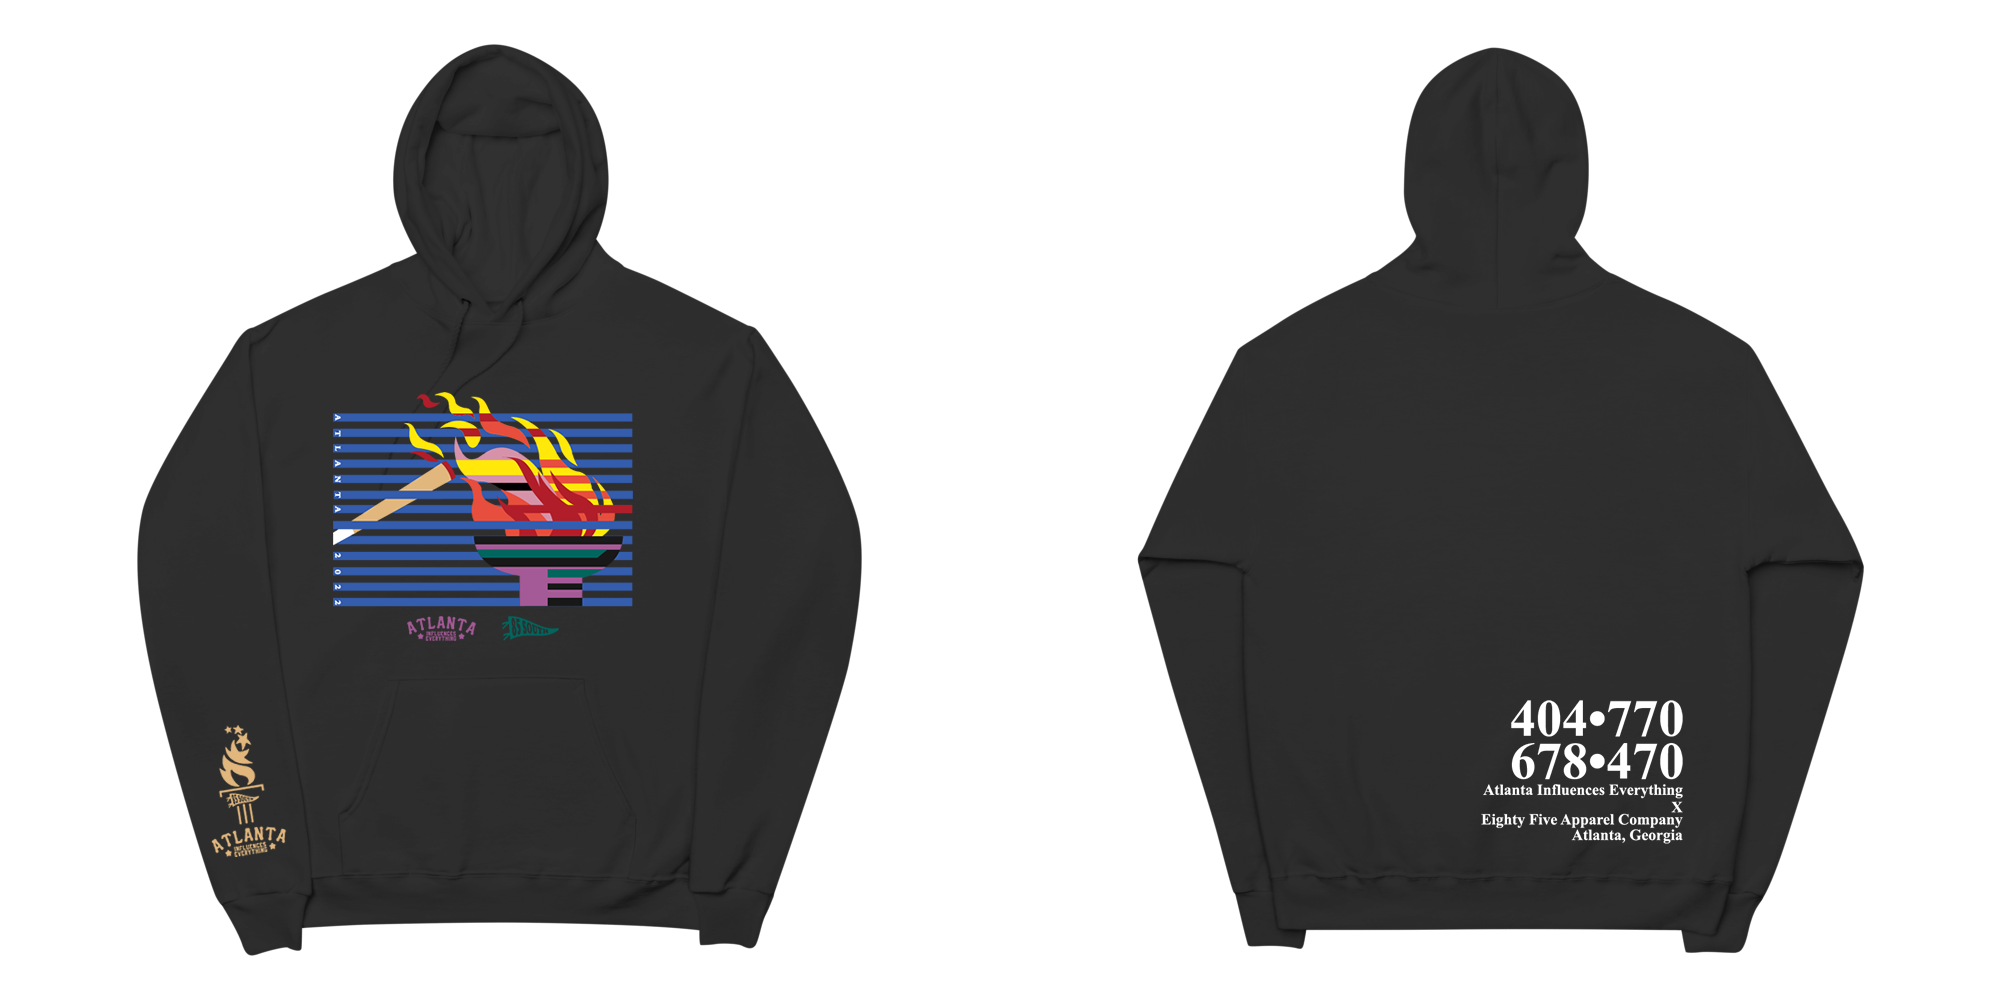 AIE Capsule Collection - '96 Olympics + 85 South Show